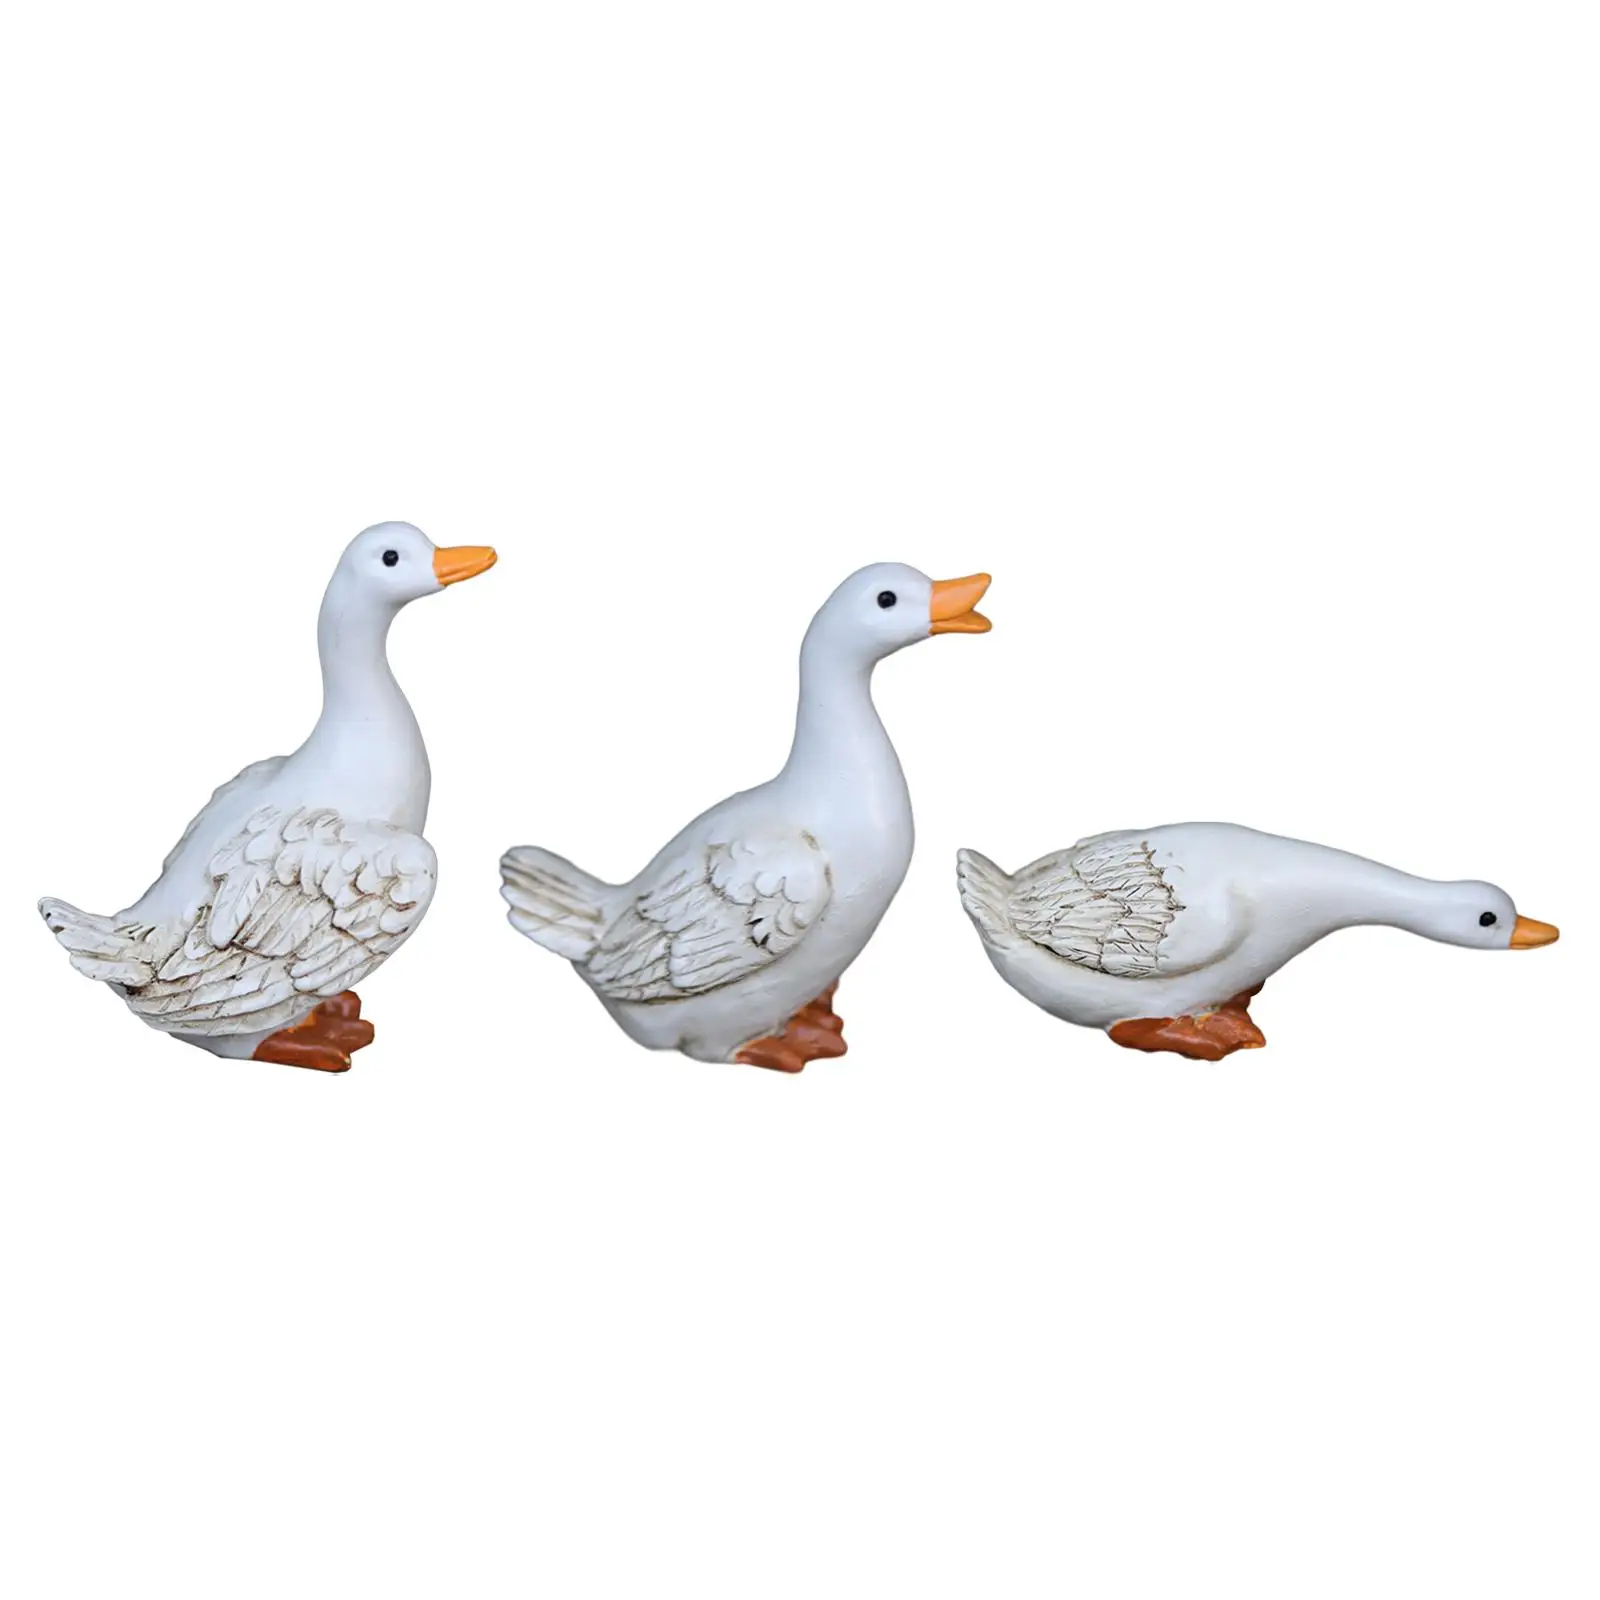 Cute Resin Duck Statue Home Decor Crafts Duck Sculpture for Patio Pond Table